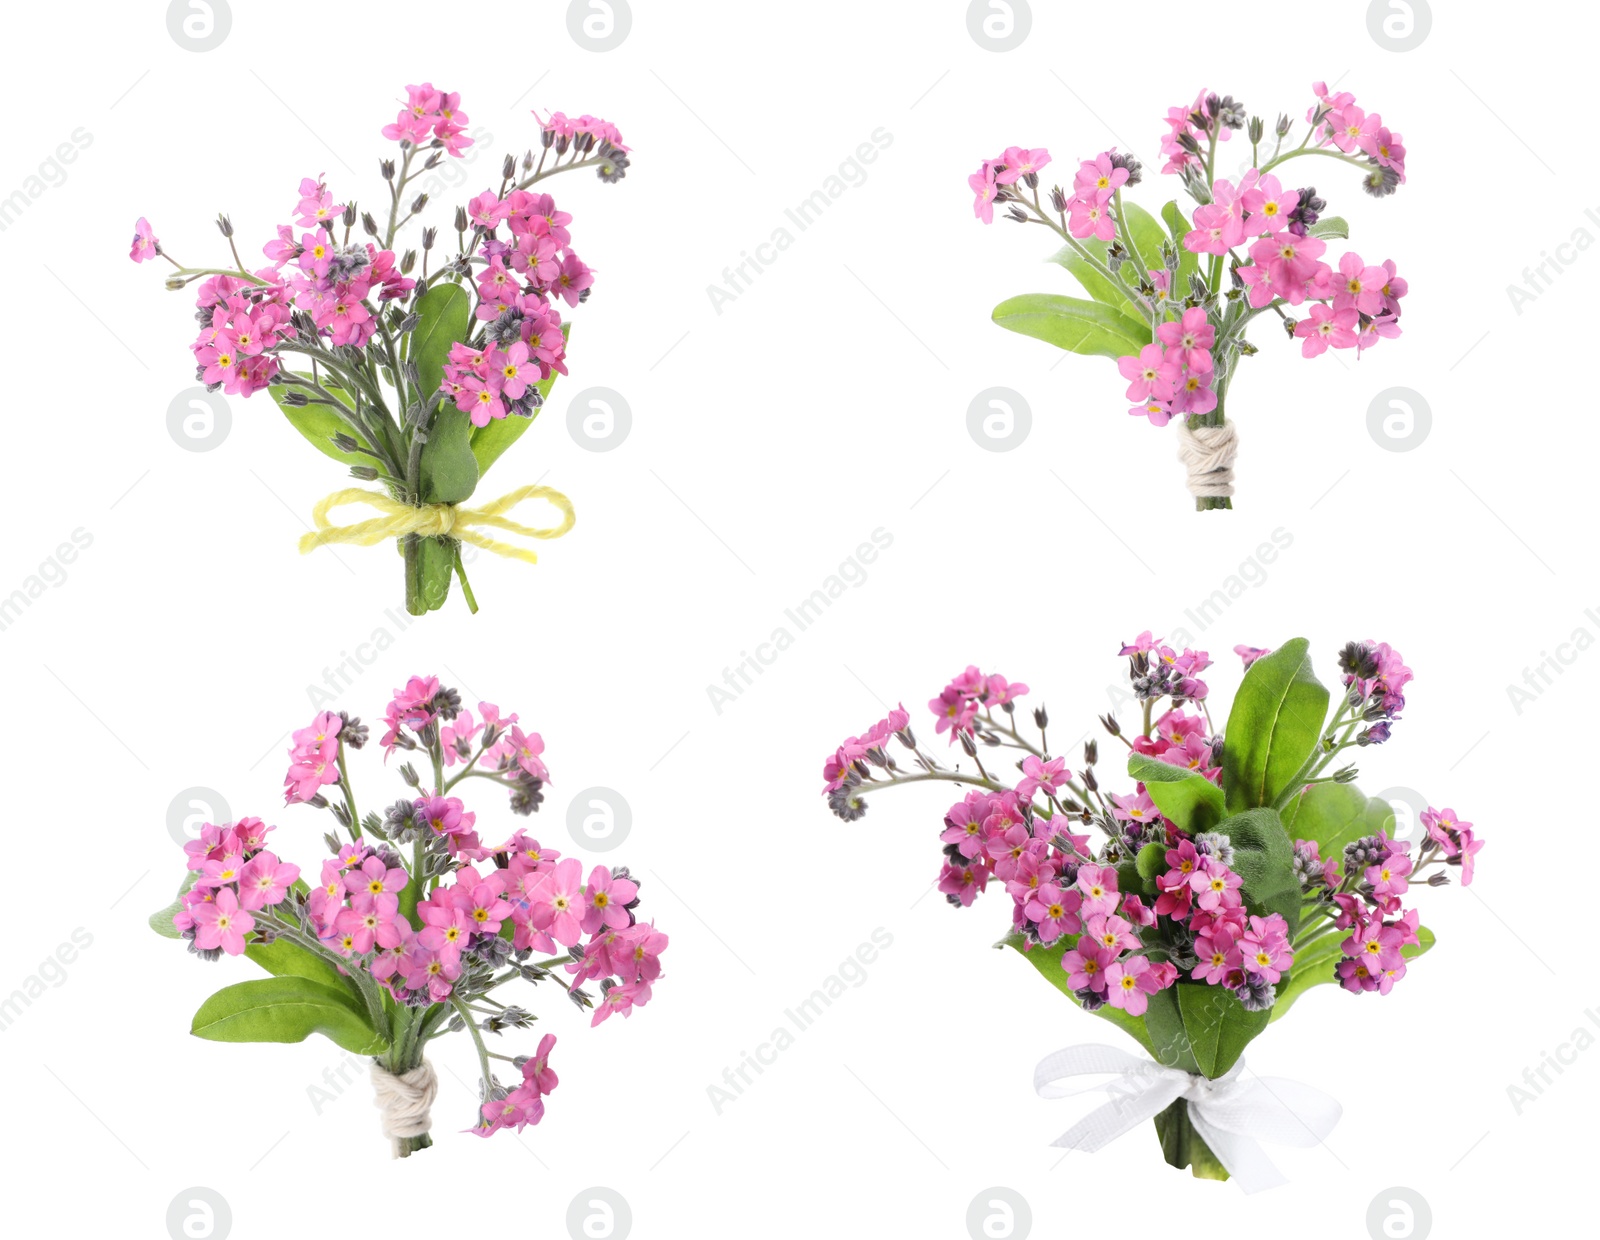 Image of Set with beautiful tender forget me not flowers on white background